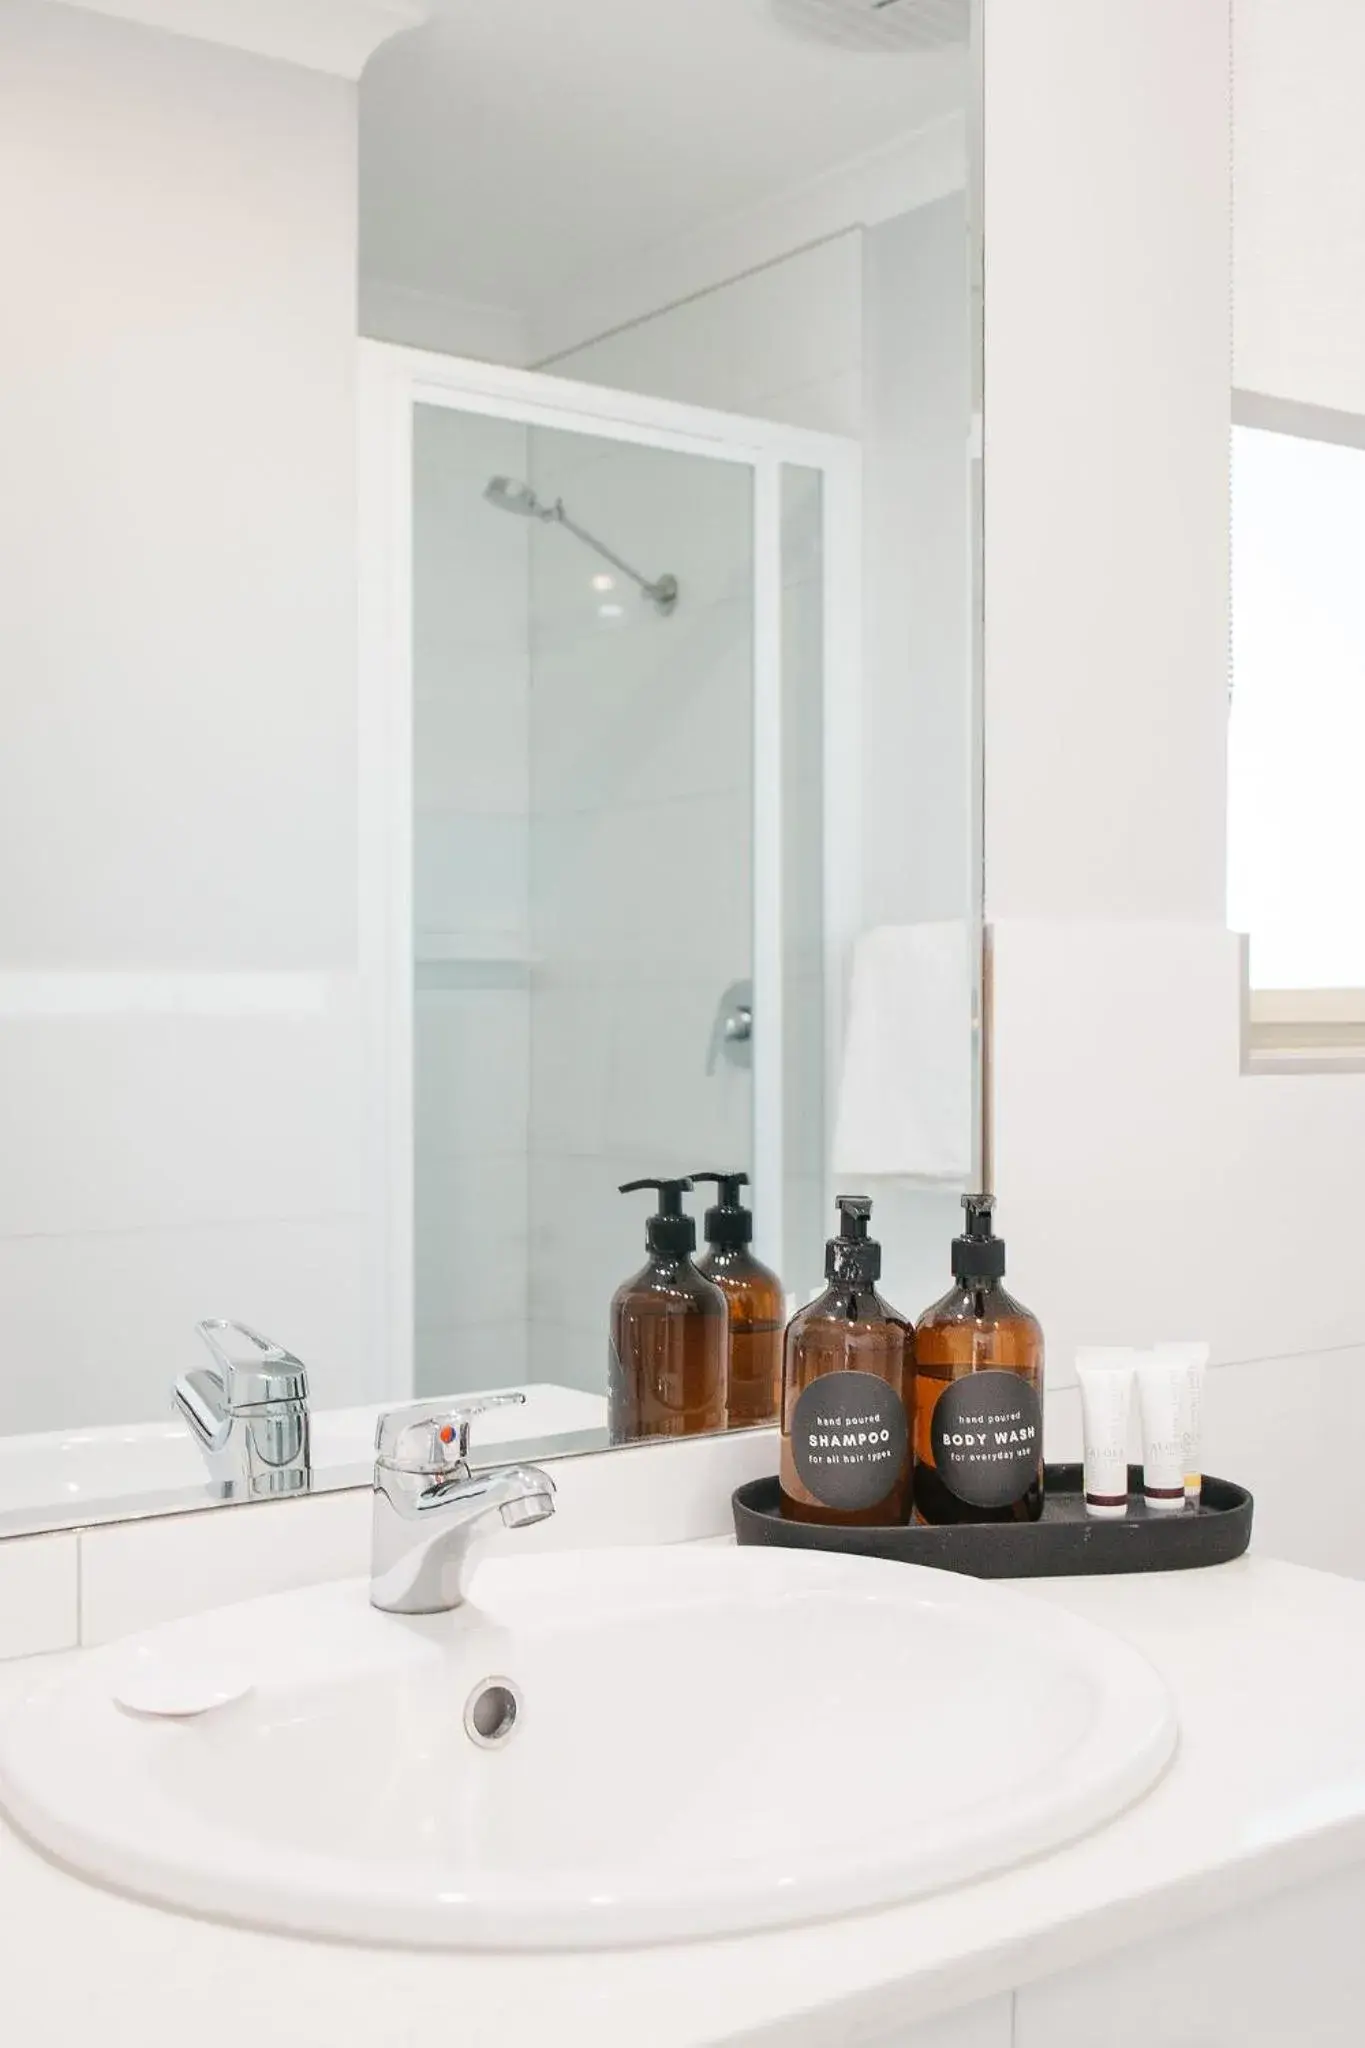 Bathroom in Quality Apartments Banksia Albany